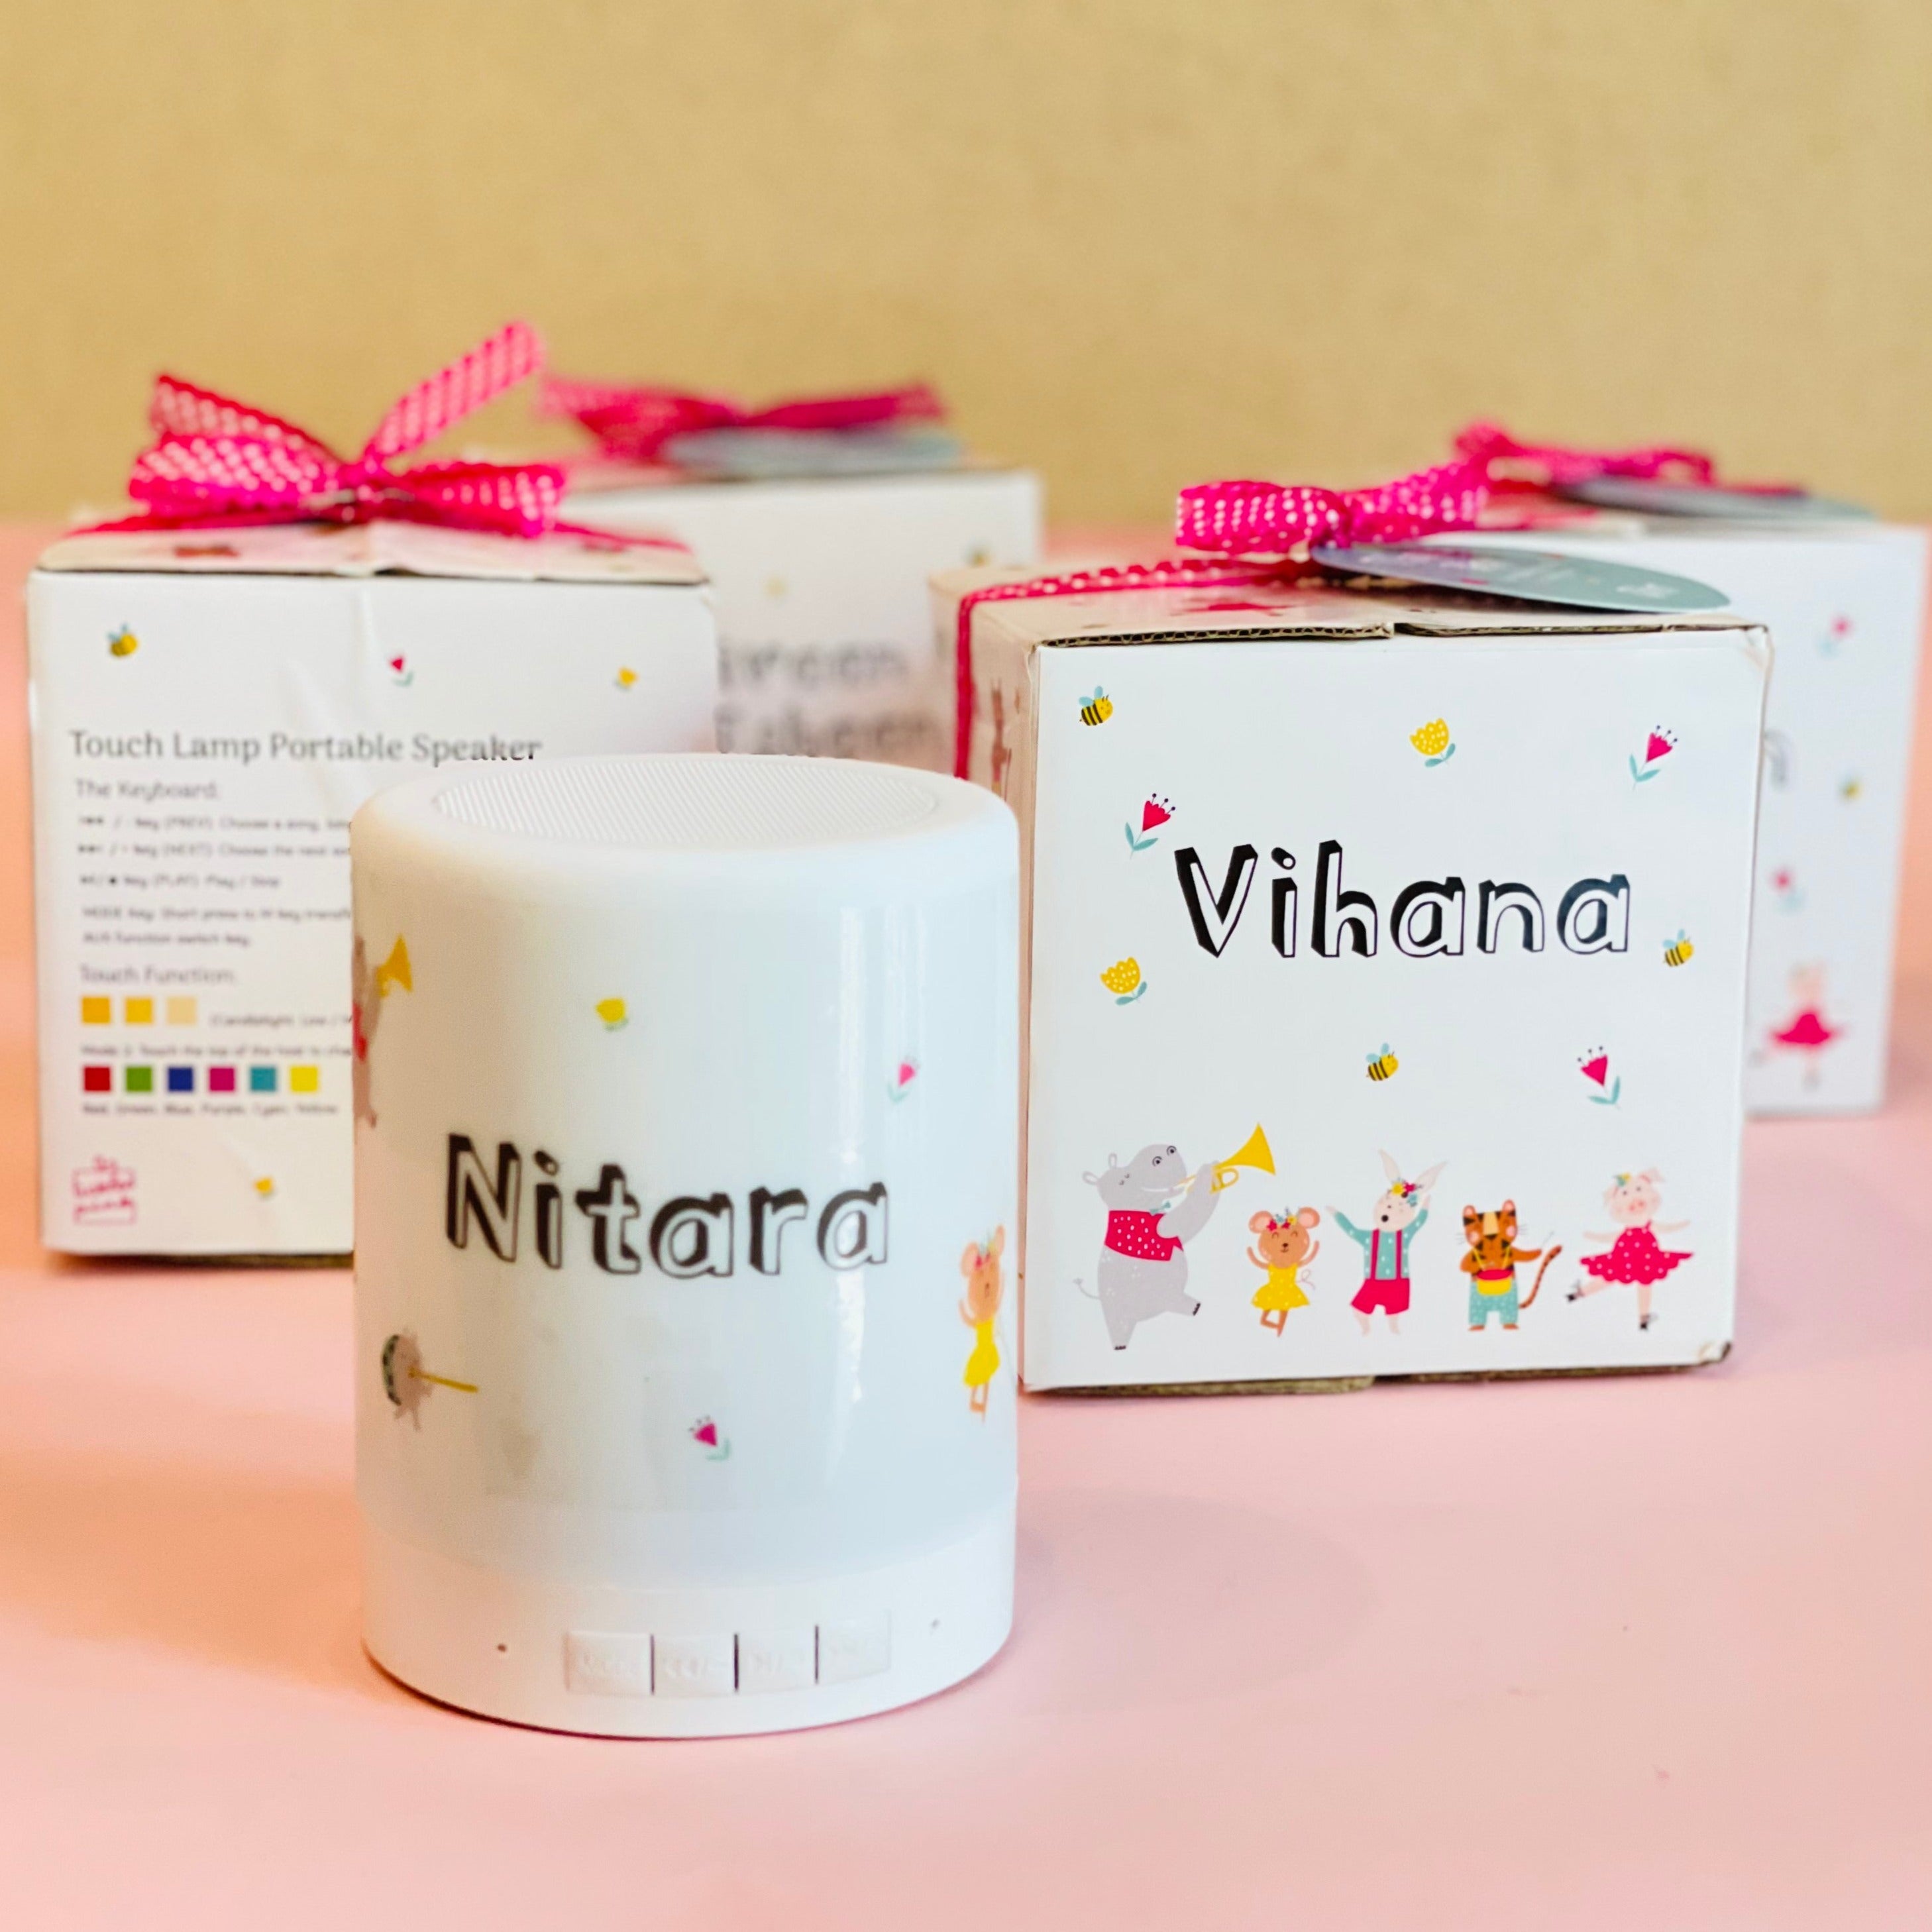 Personalized Name Speakers for kids return gifts